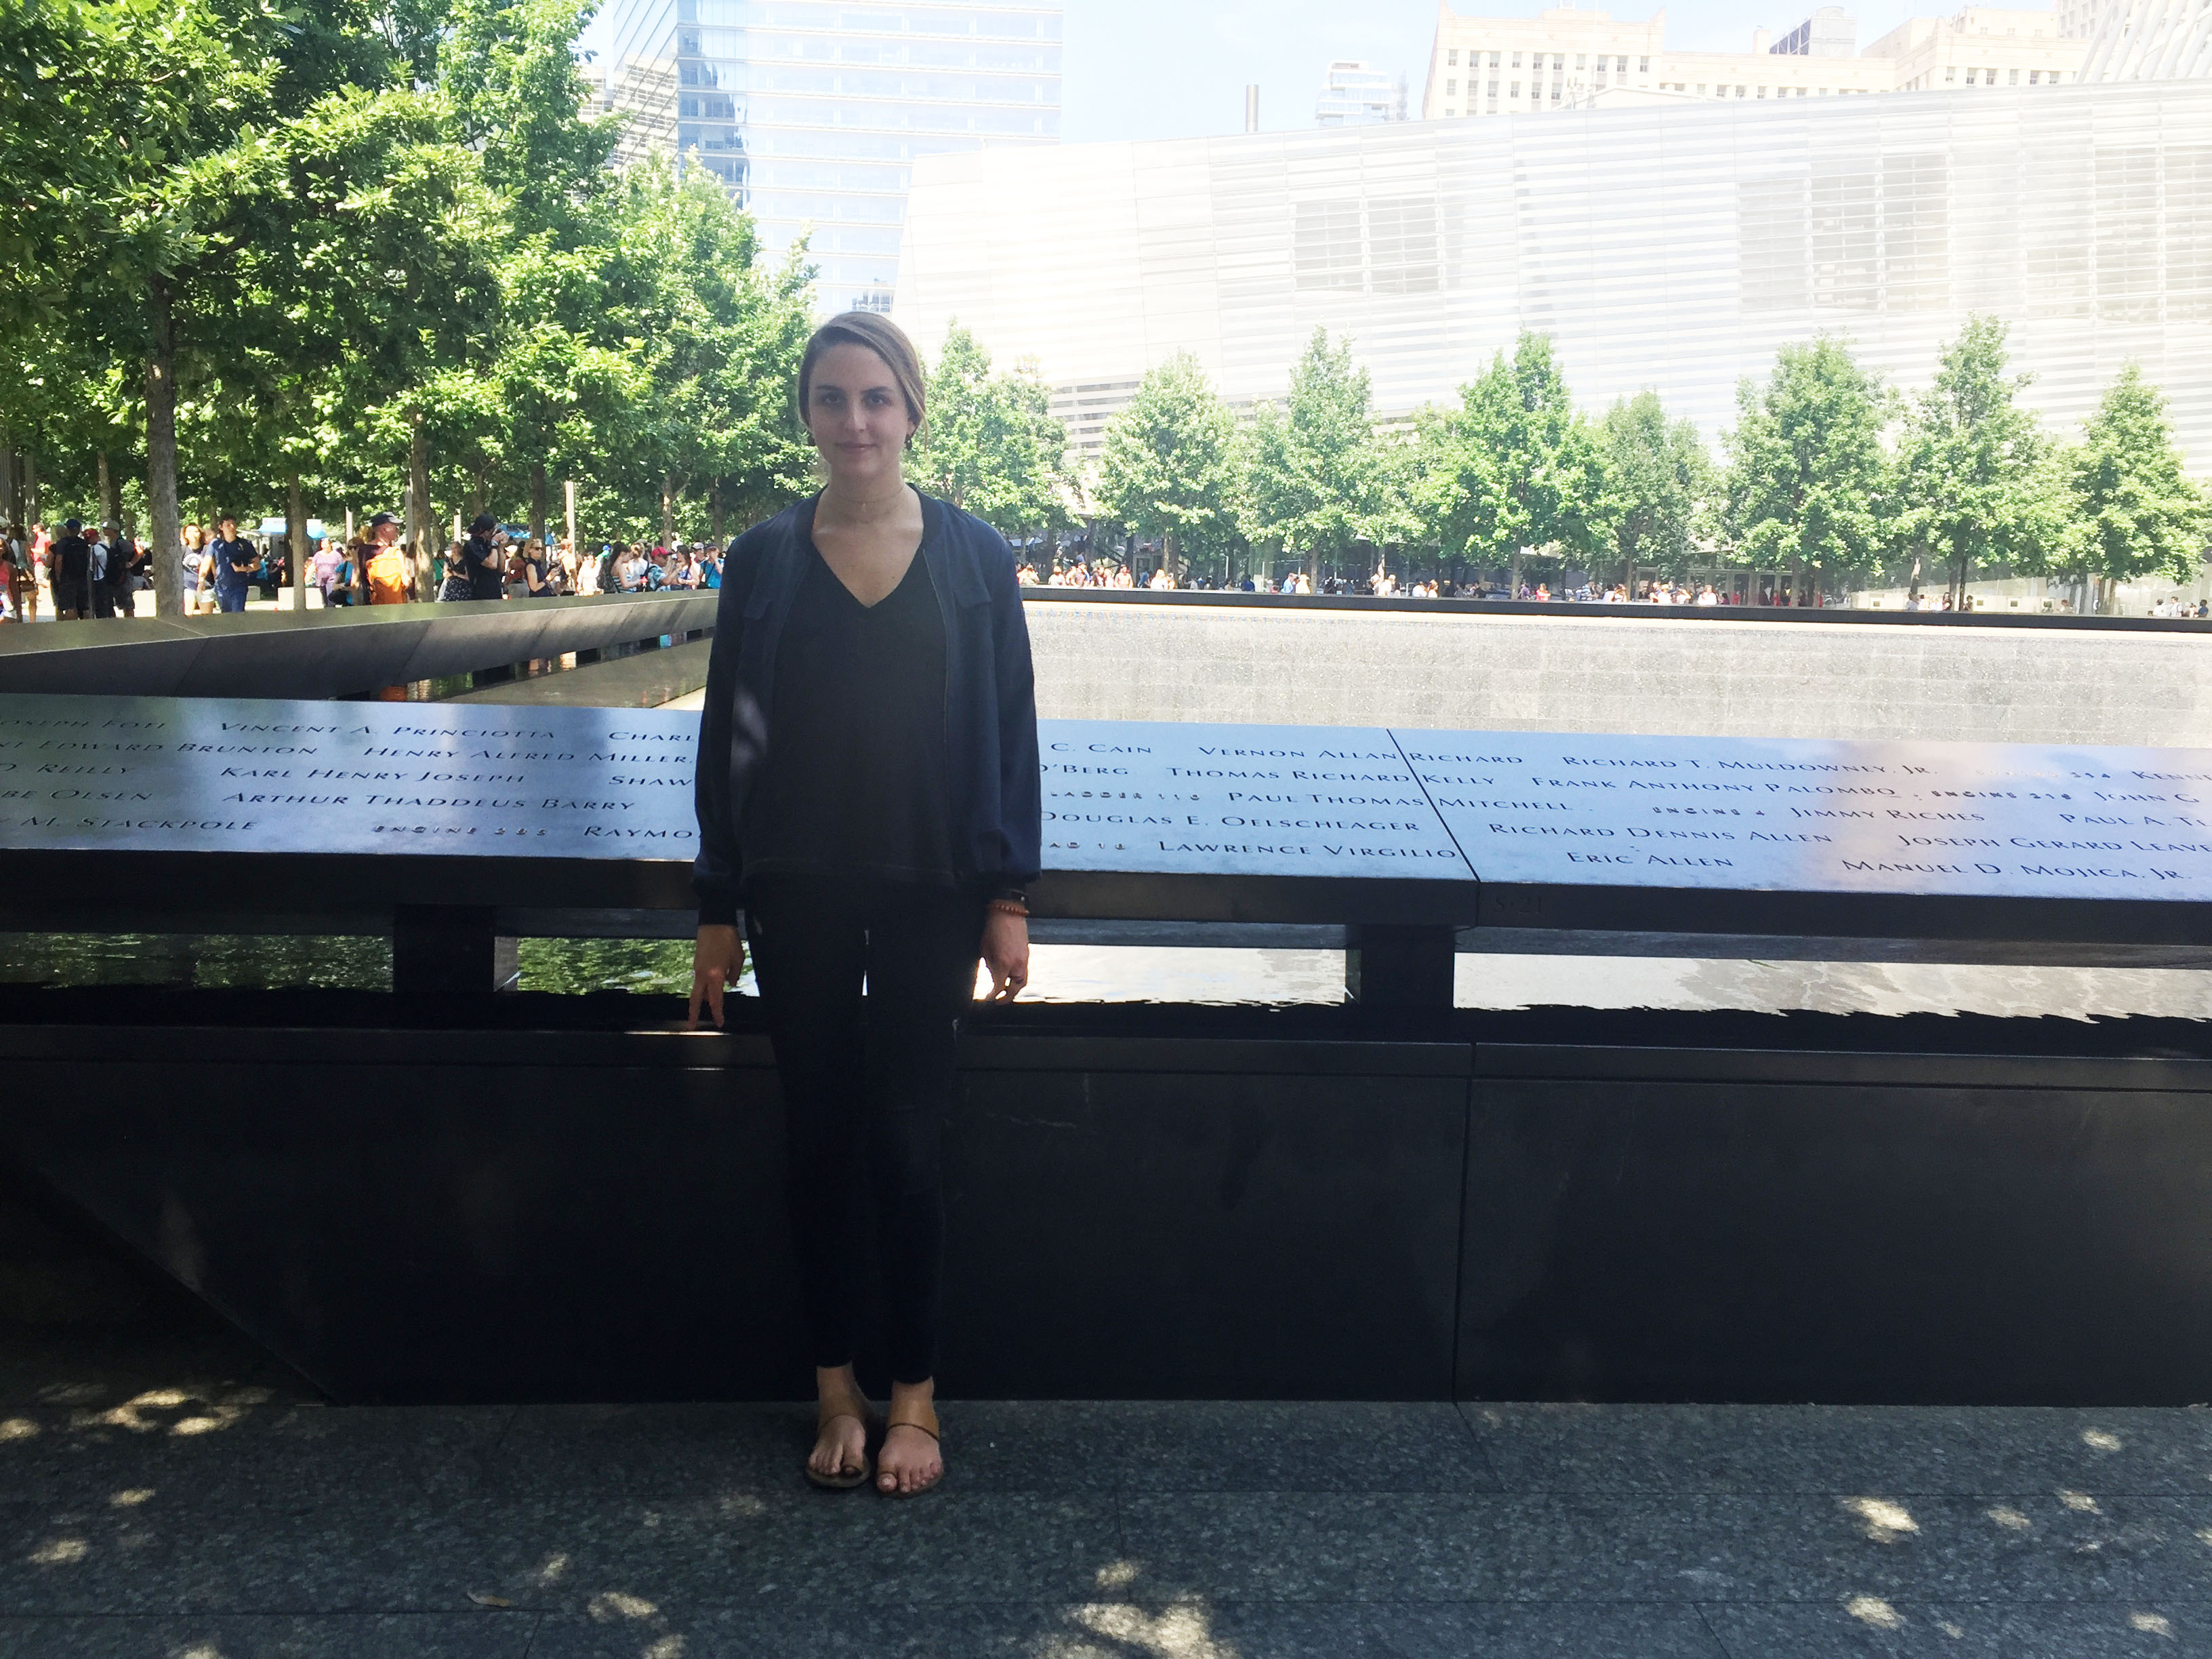 Madeline Lipton, a communications intern, poses for a photo on the 9/11 Memorial Plaza.